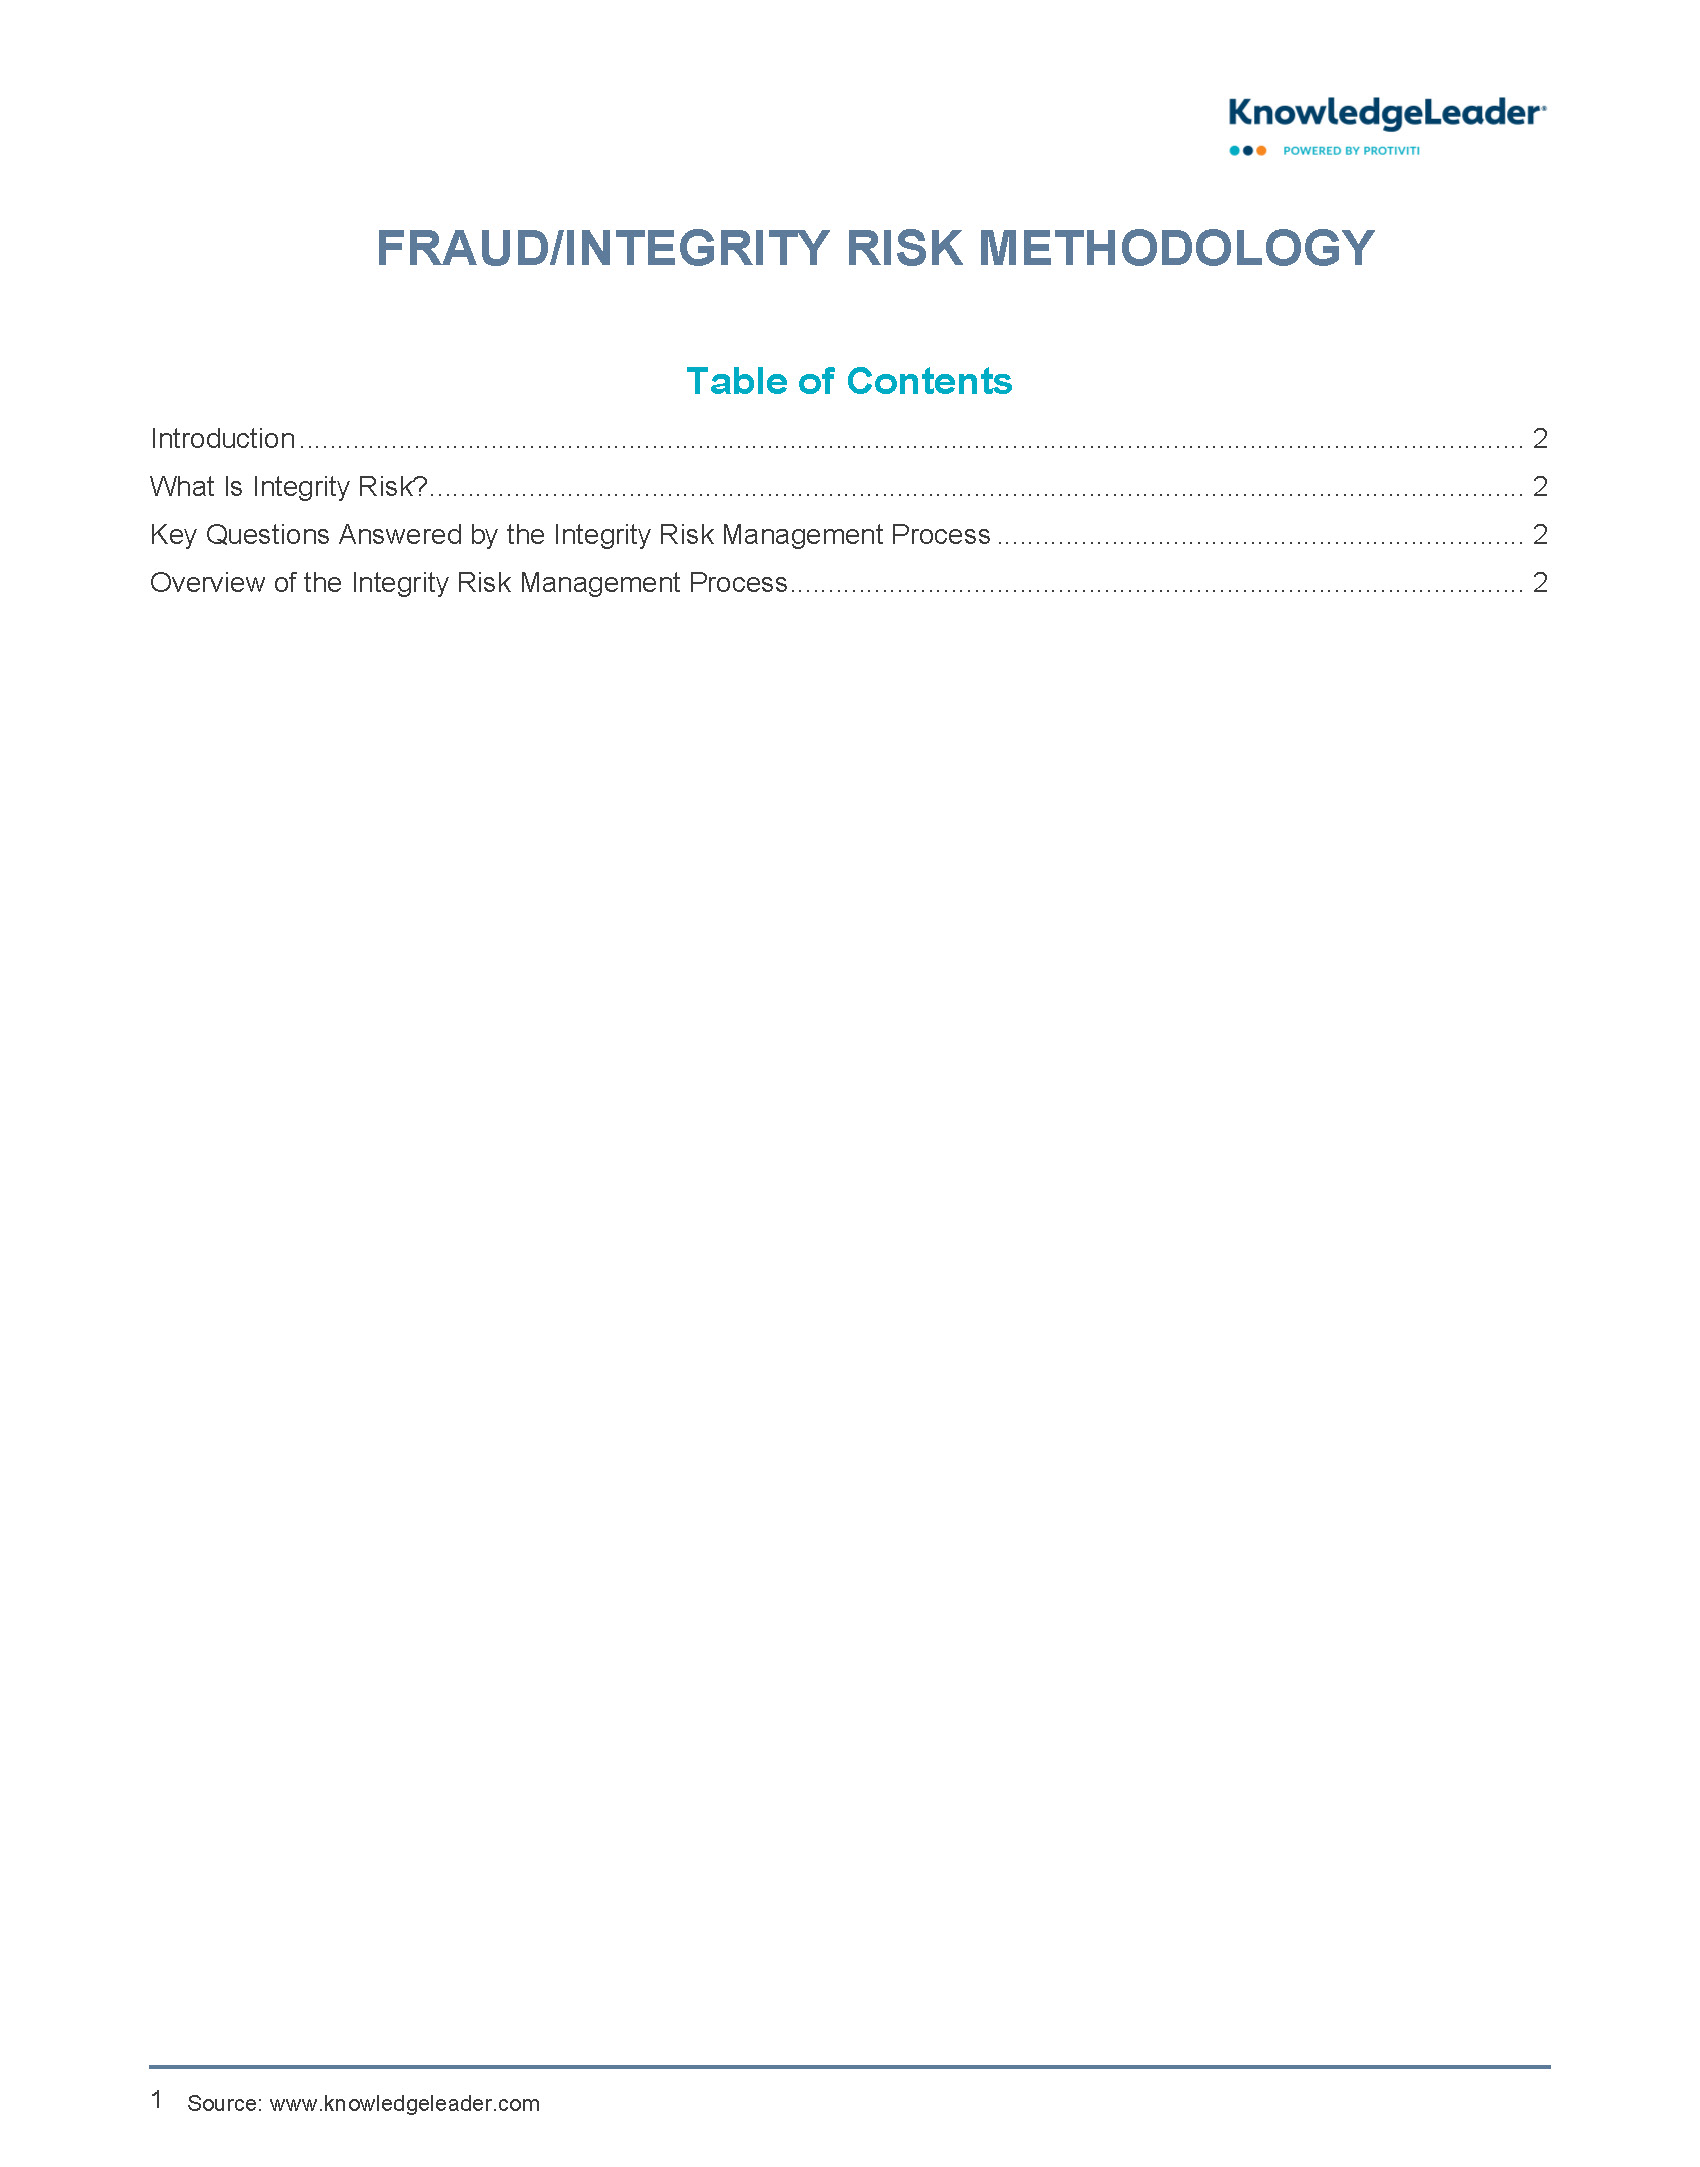 Screenshot of the first page of Fraud Integrity Risk Methodology